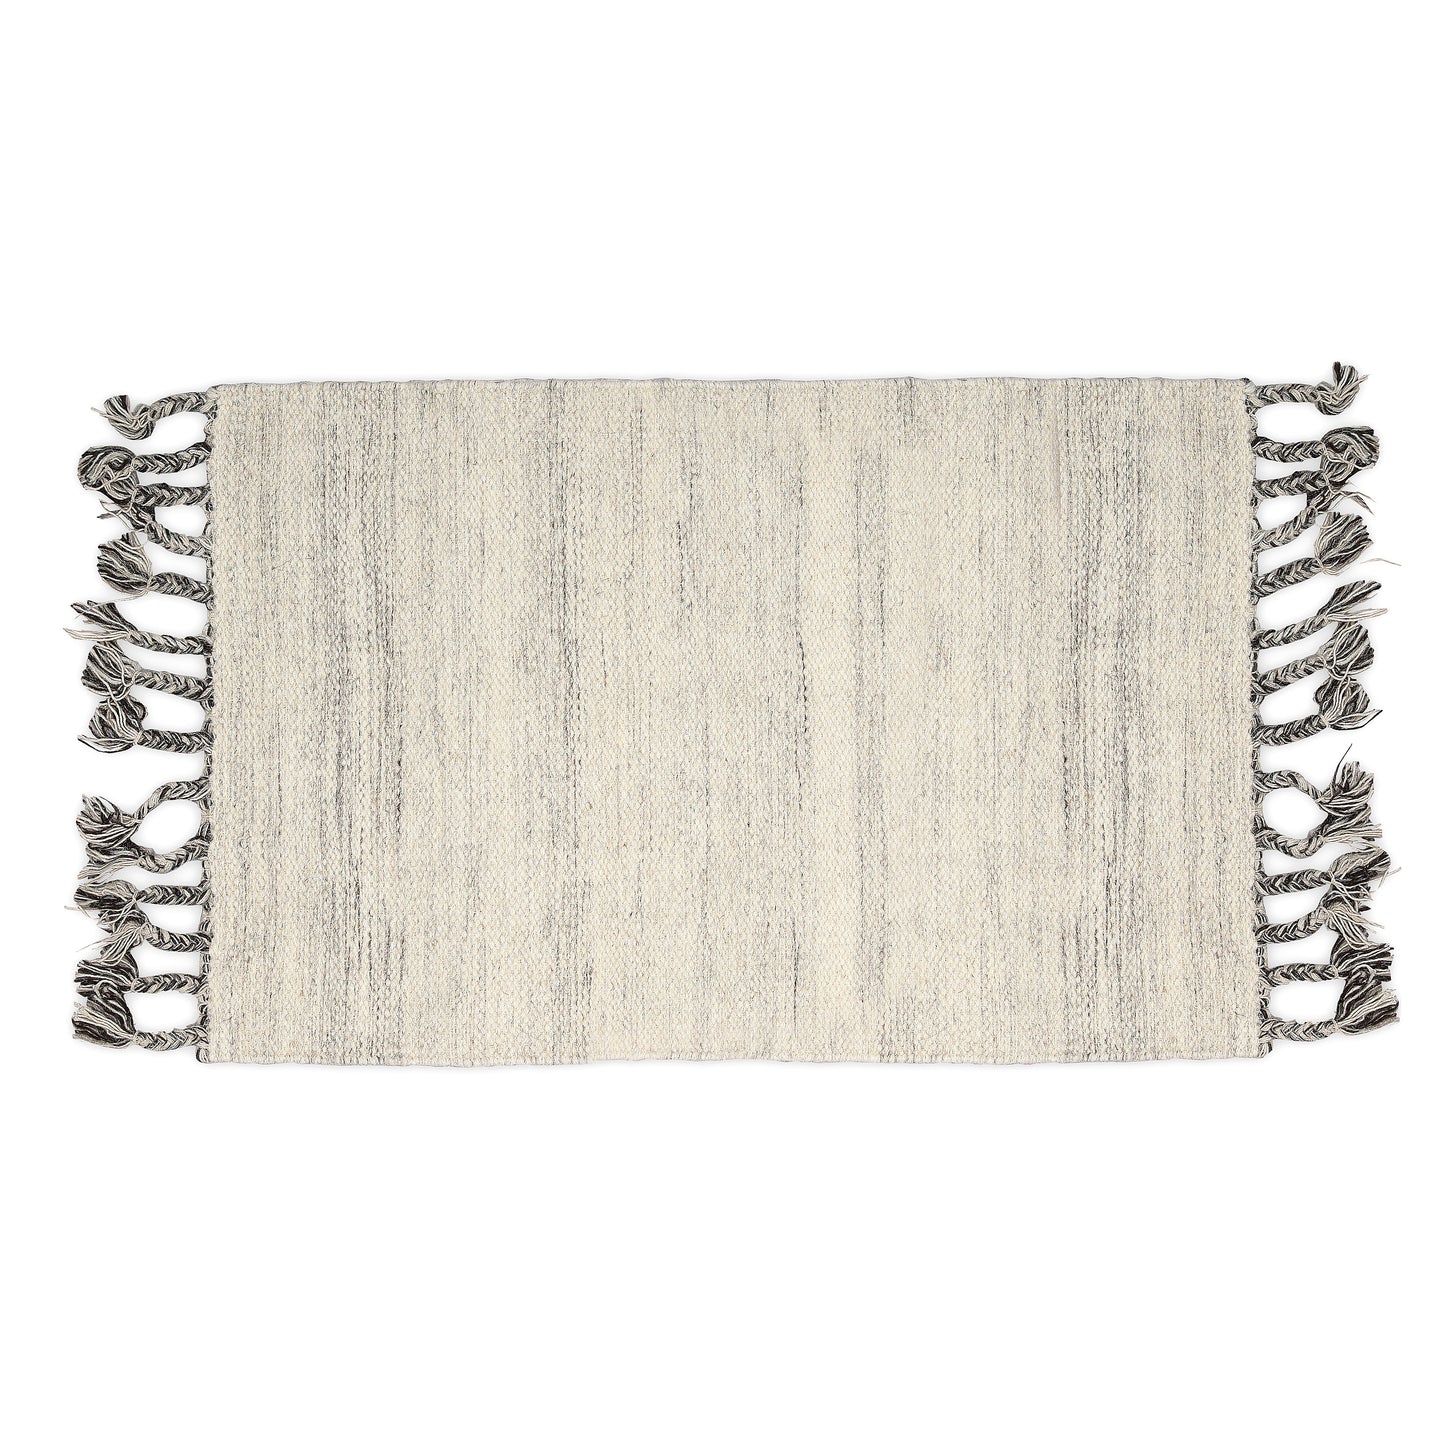 Hand Woven Wool Area Rug Woven White With Gray Shades 1224